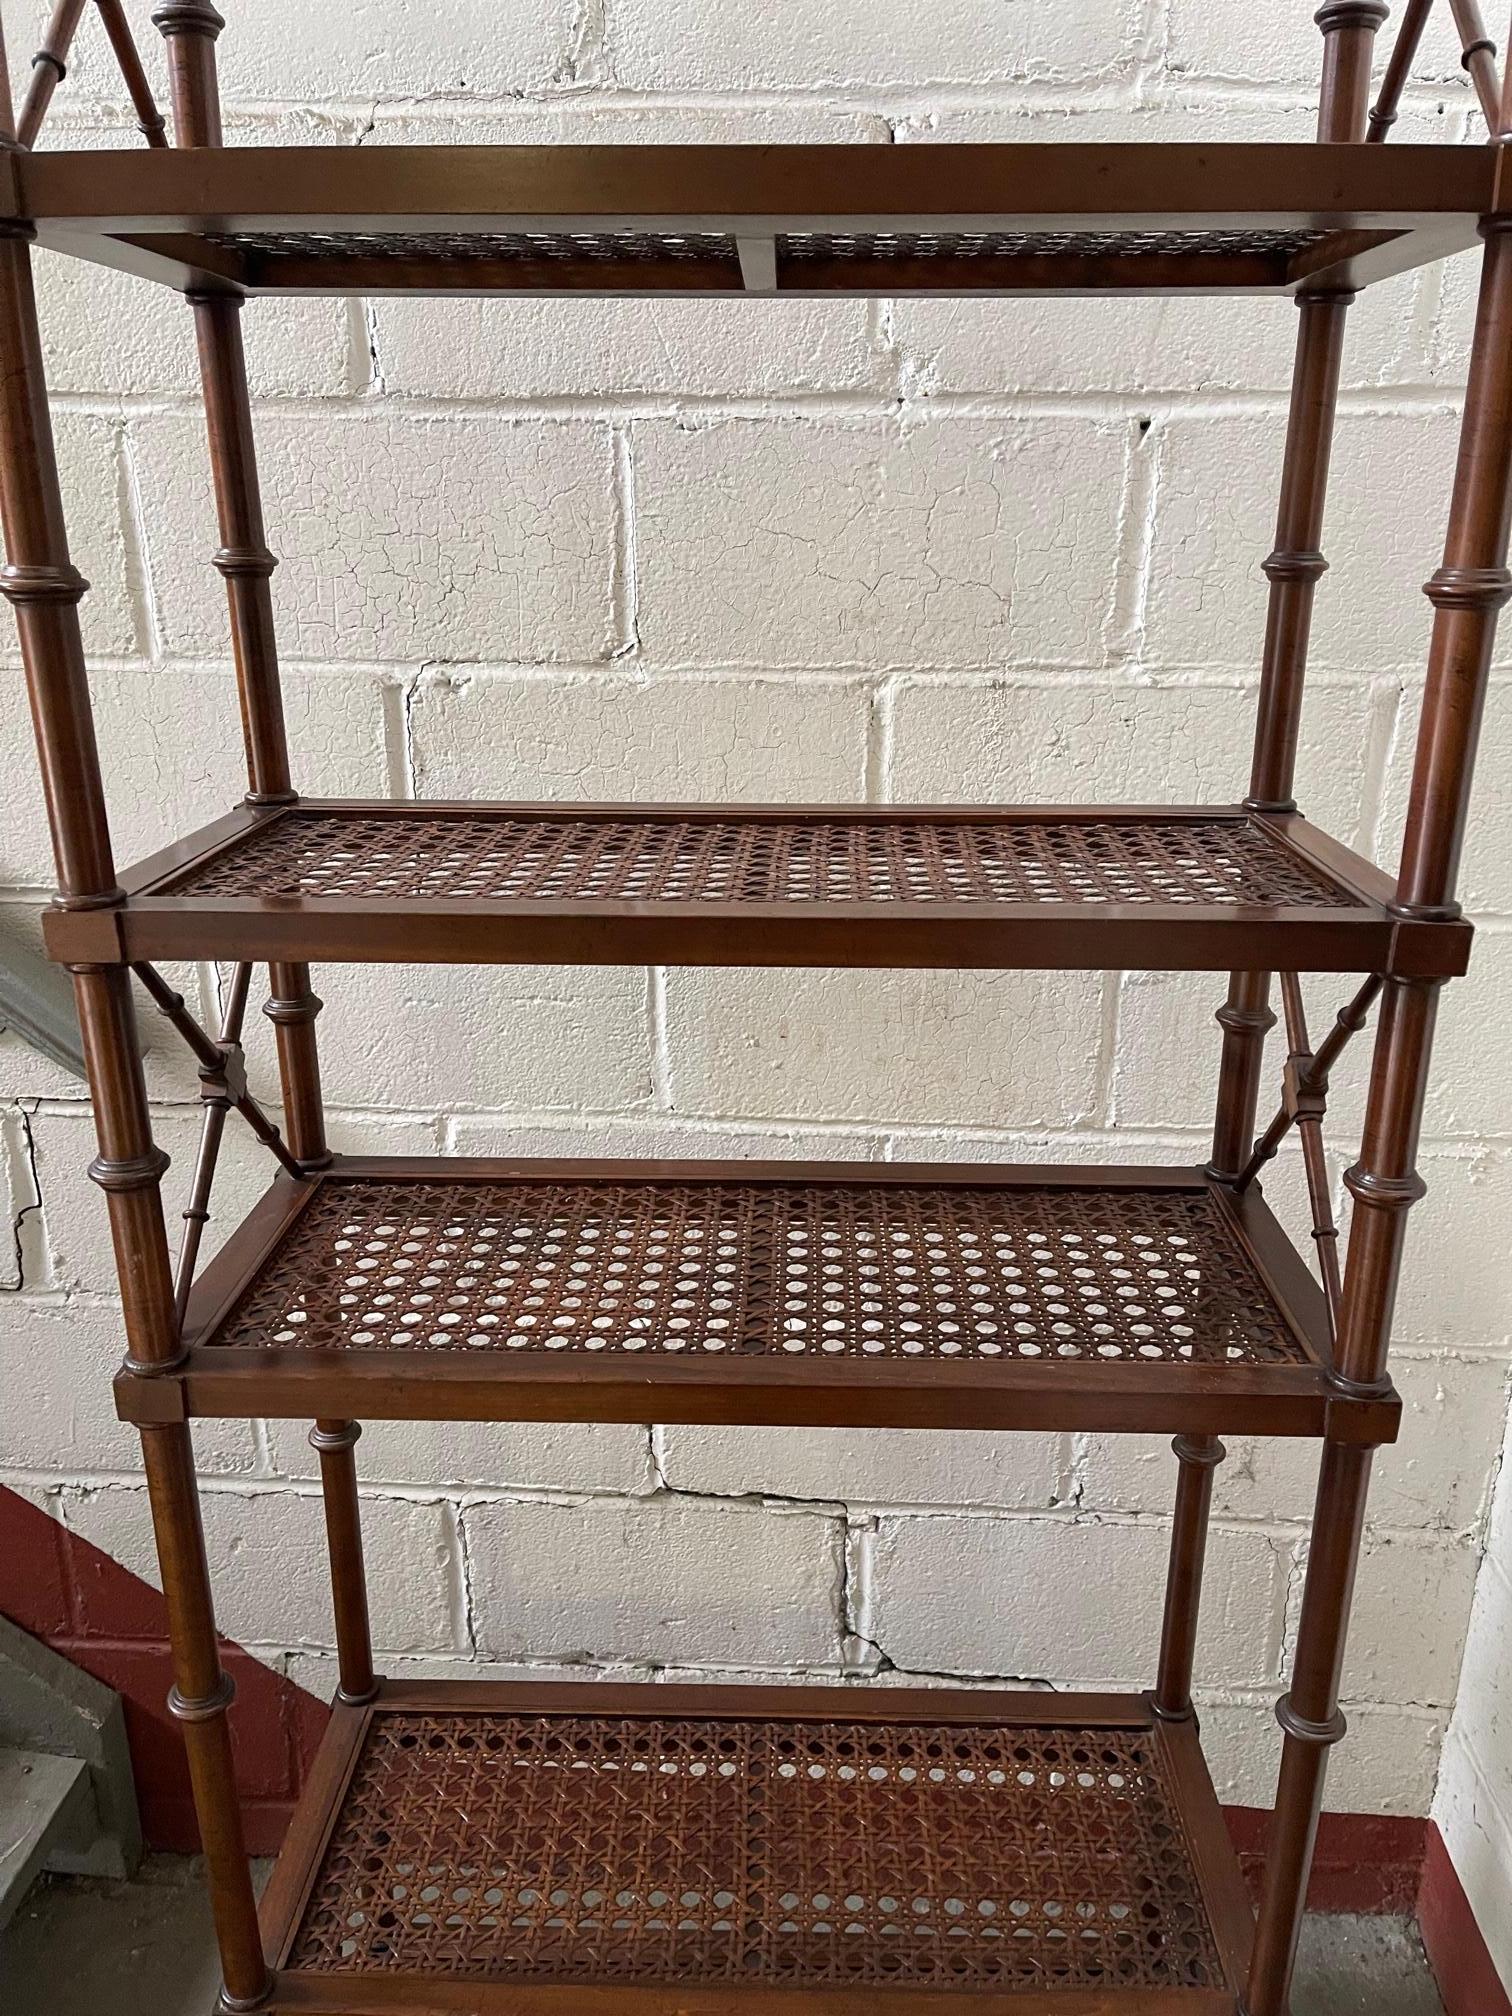 1970s Pair of Neoclassical Style Wood Etageres With Faux Bamboo Decoration and Caned shelves.  There are 5 shelves on each etagere and glass inserts that rest on the shelves